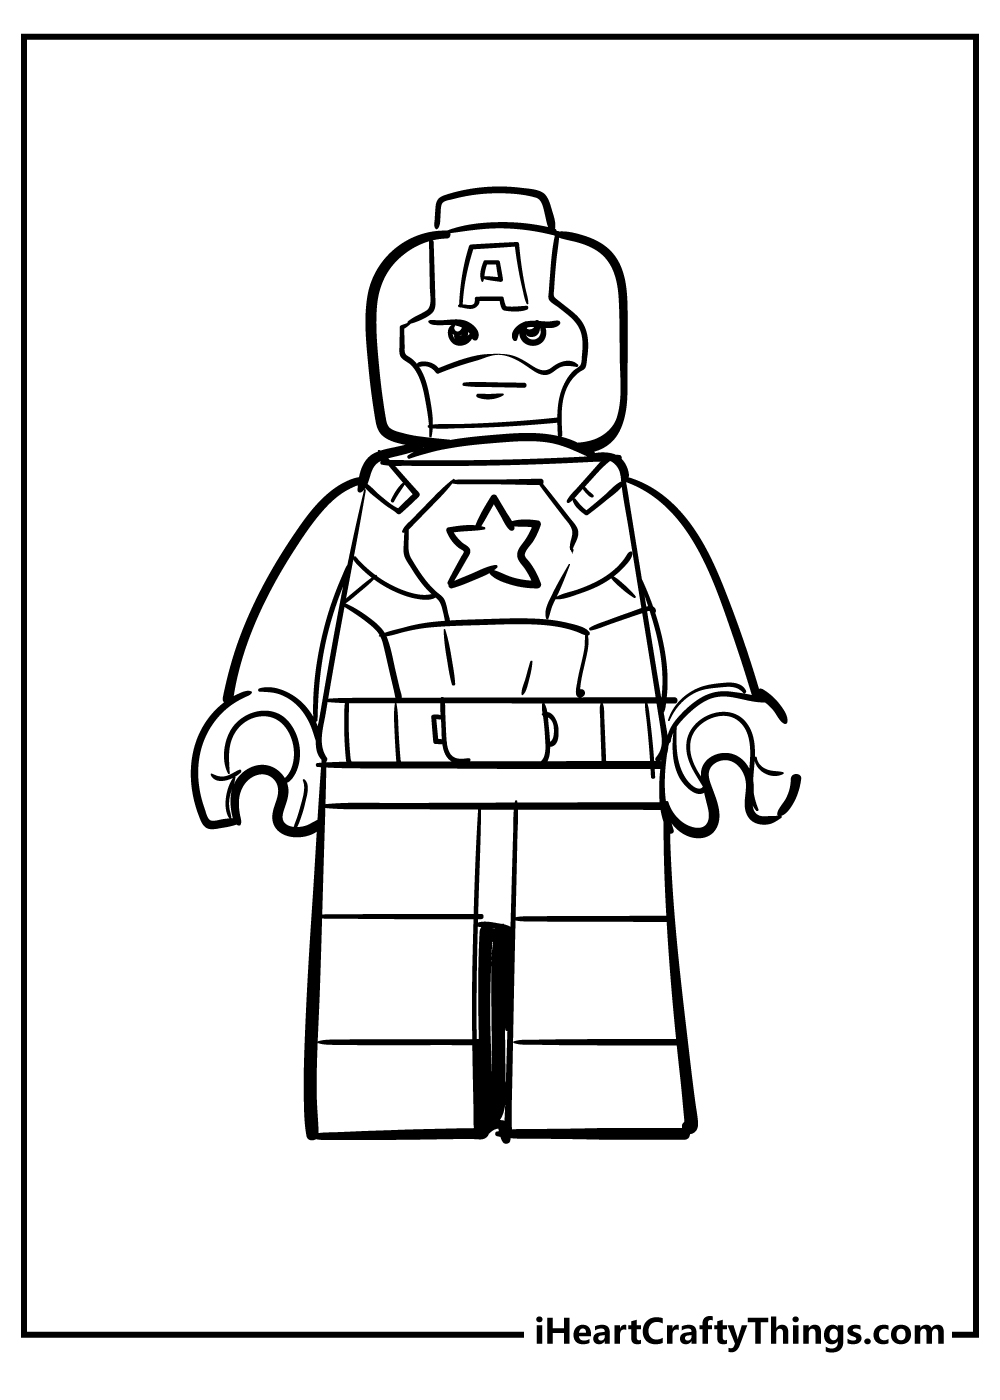 Lego Avengers Coloring Pages for preschoolers free printable